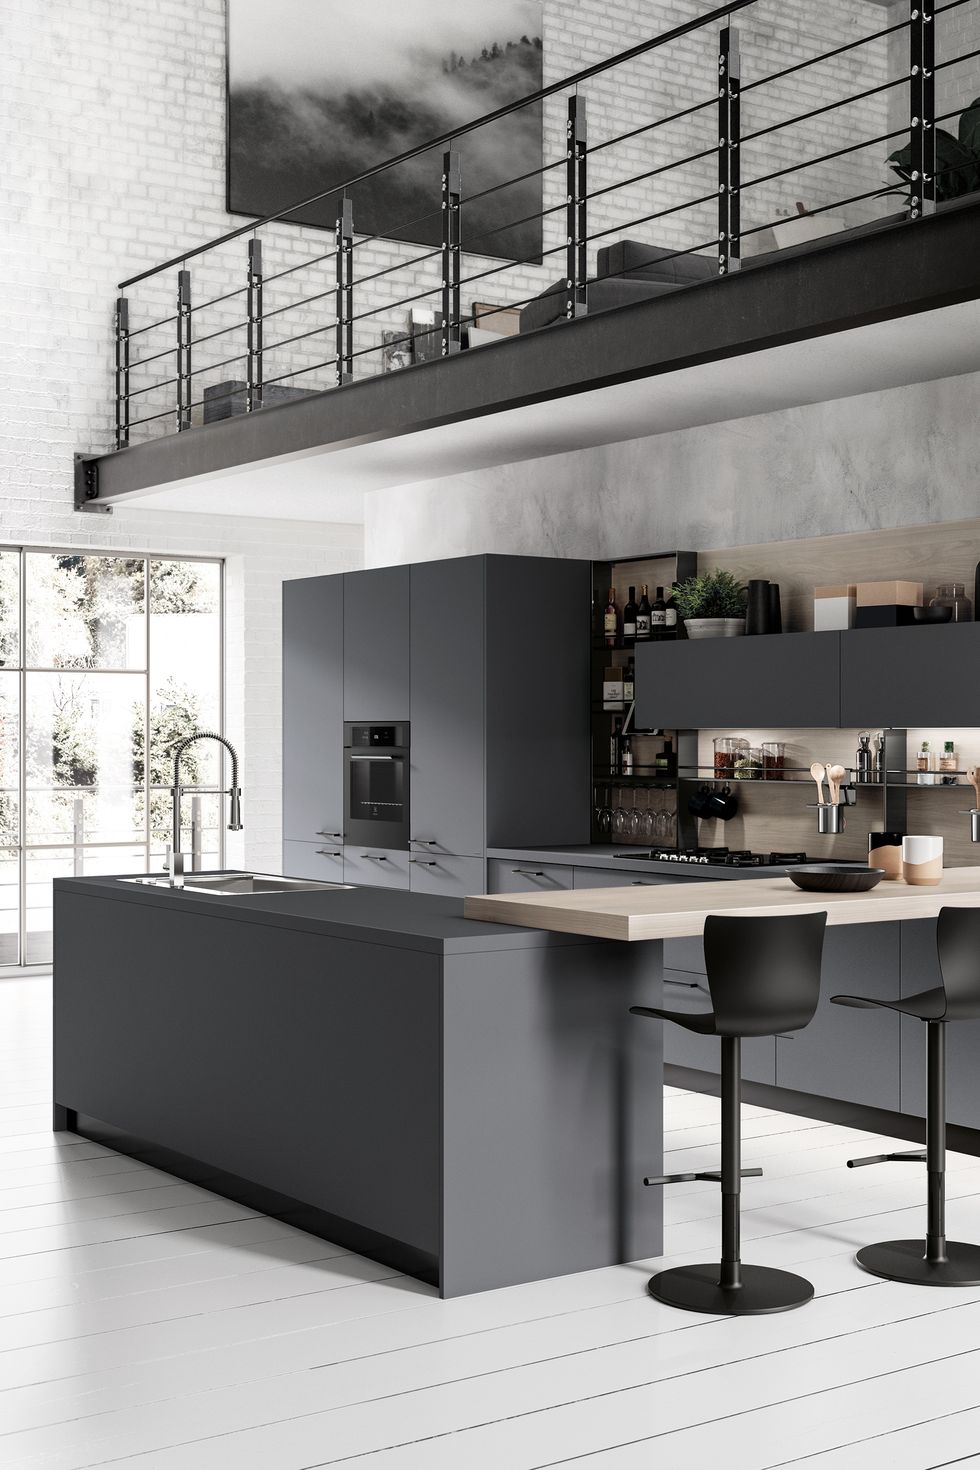 Want in on the Matte Black Kitchen Trend? 6 Ideas to Help You Pull It Off!  - New England Building Supply